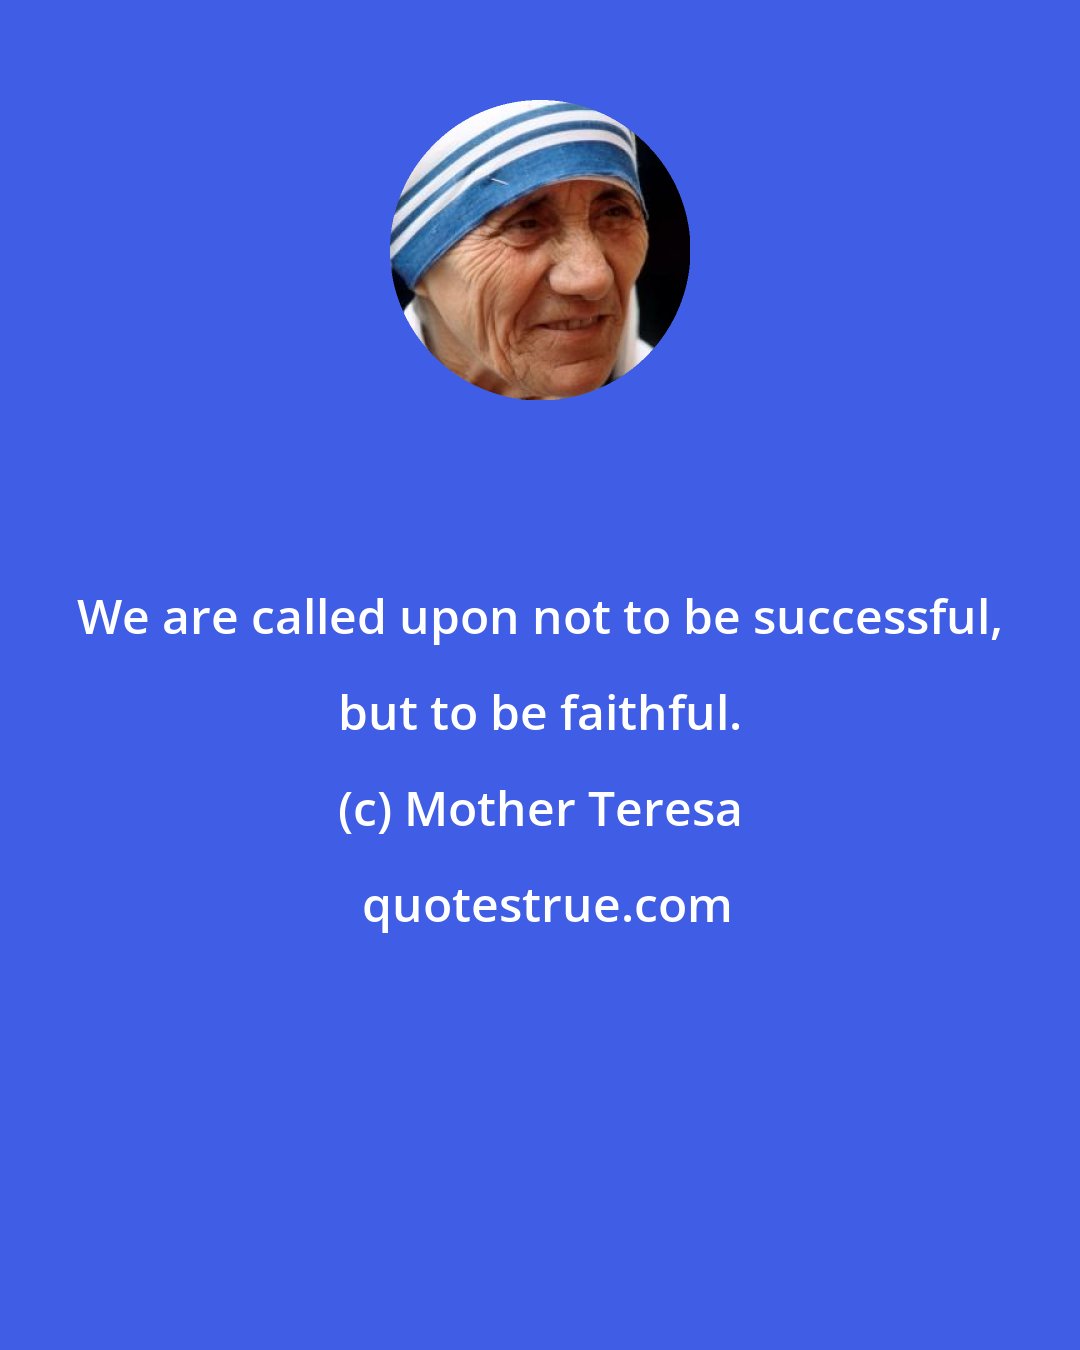 Mother Teresa: We are called upon not to be successful, but to be faithful.